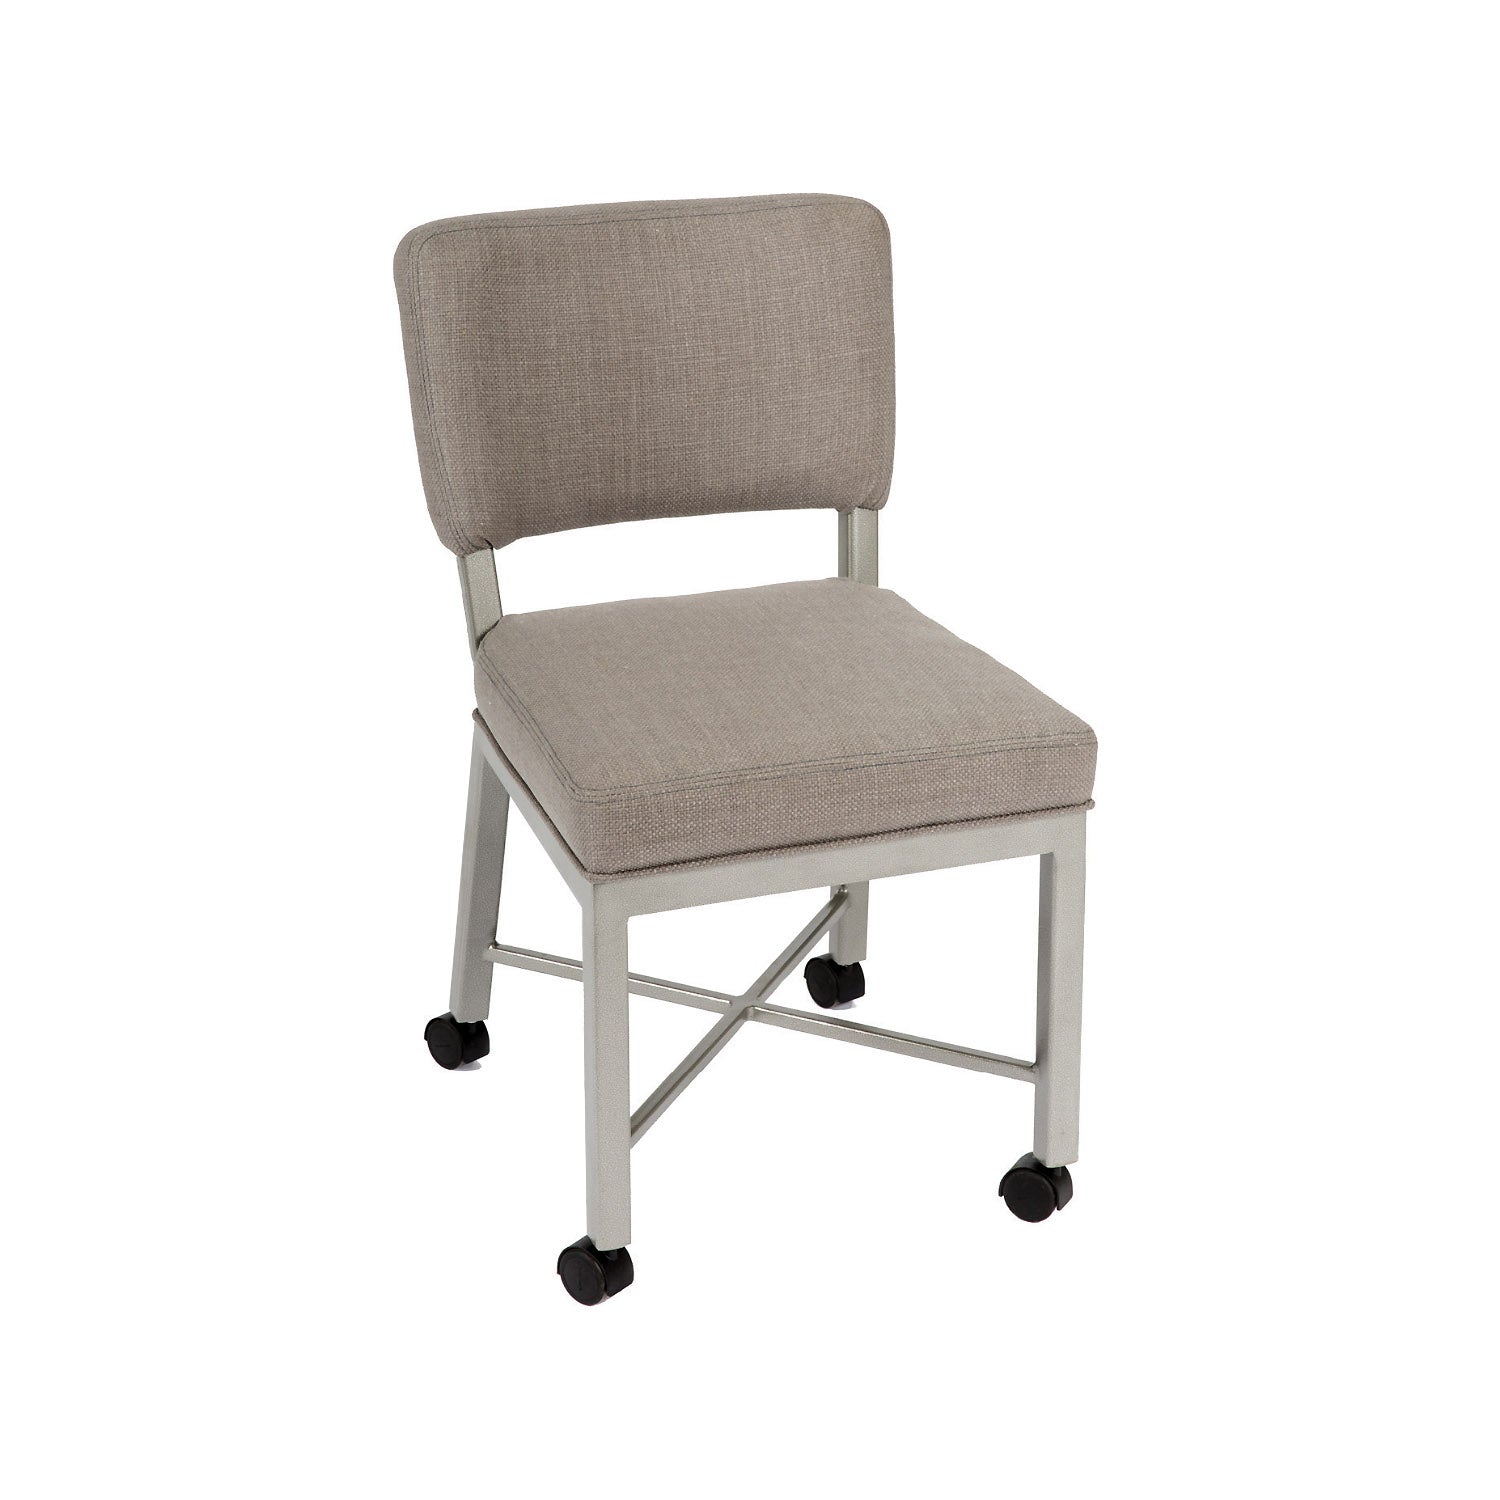 Wesley Allen Miami Chair with Malibu Sand in Silver Palladium with Casters. Finish.